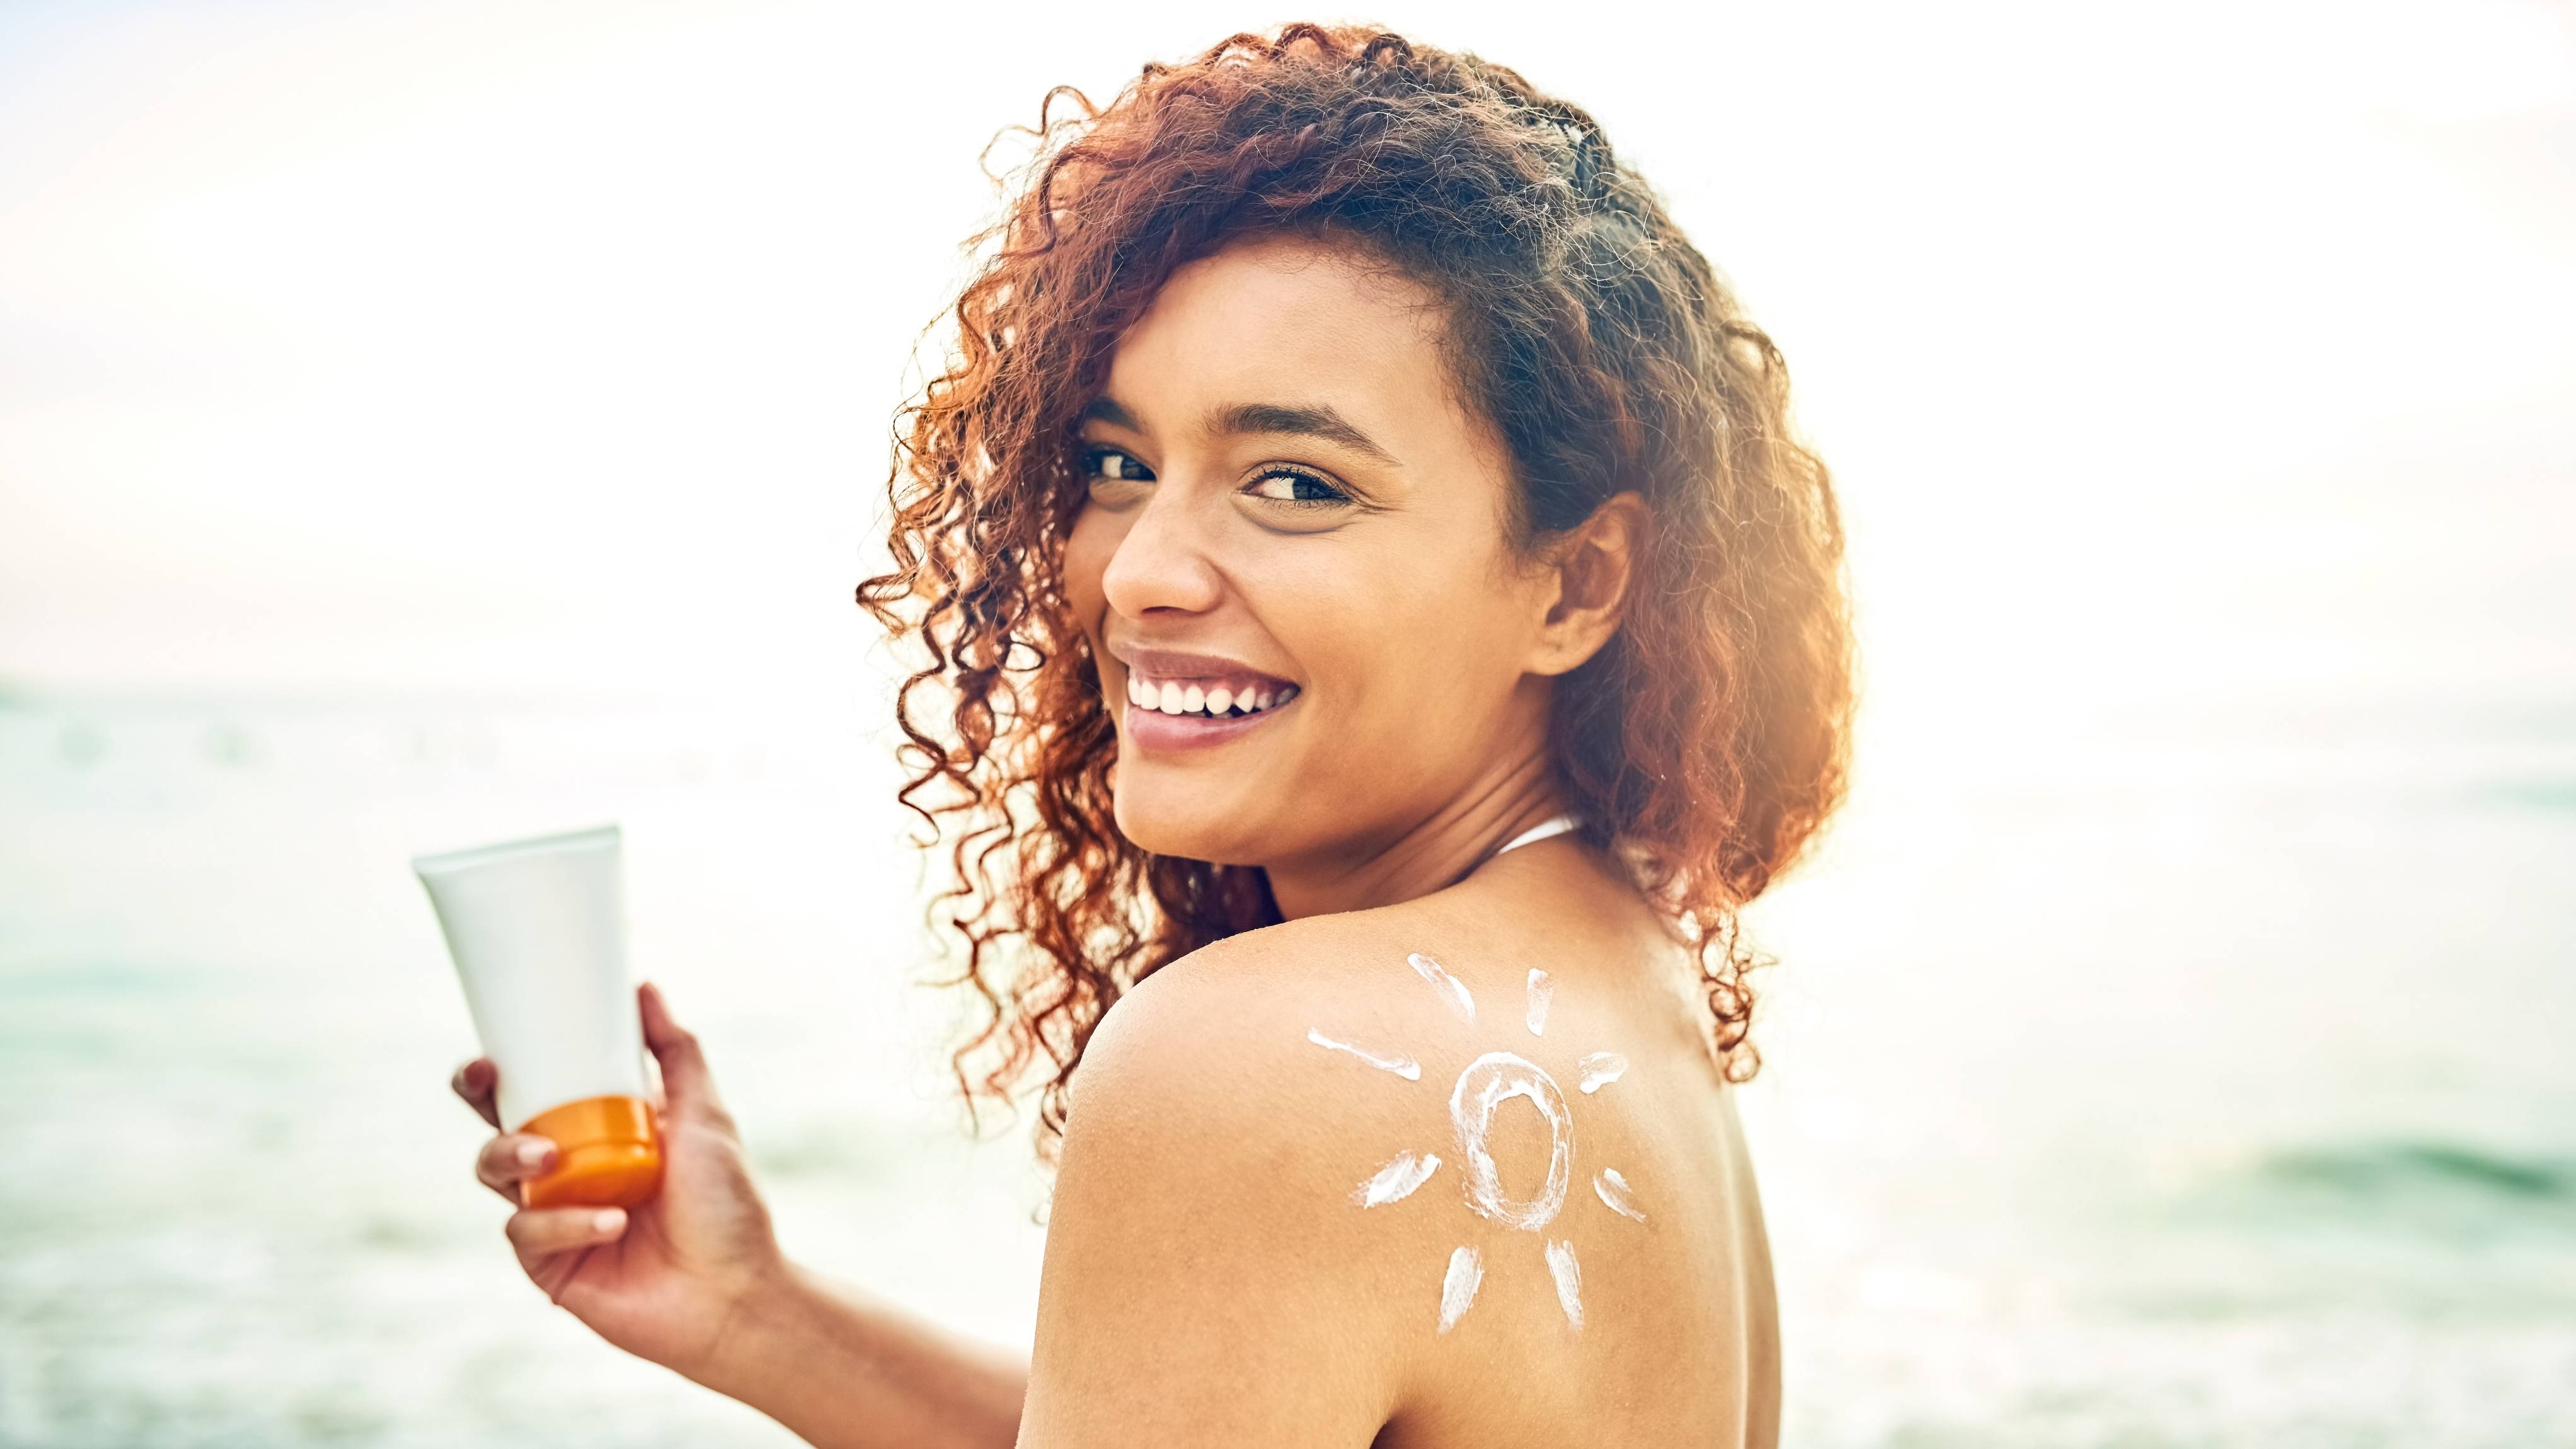 Portrait of a young woman applying sunscreen at the beach